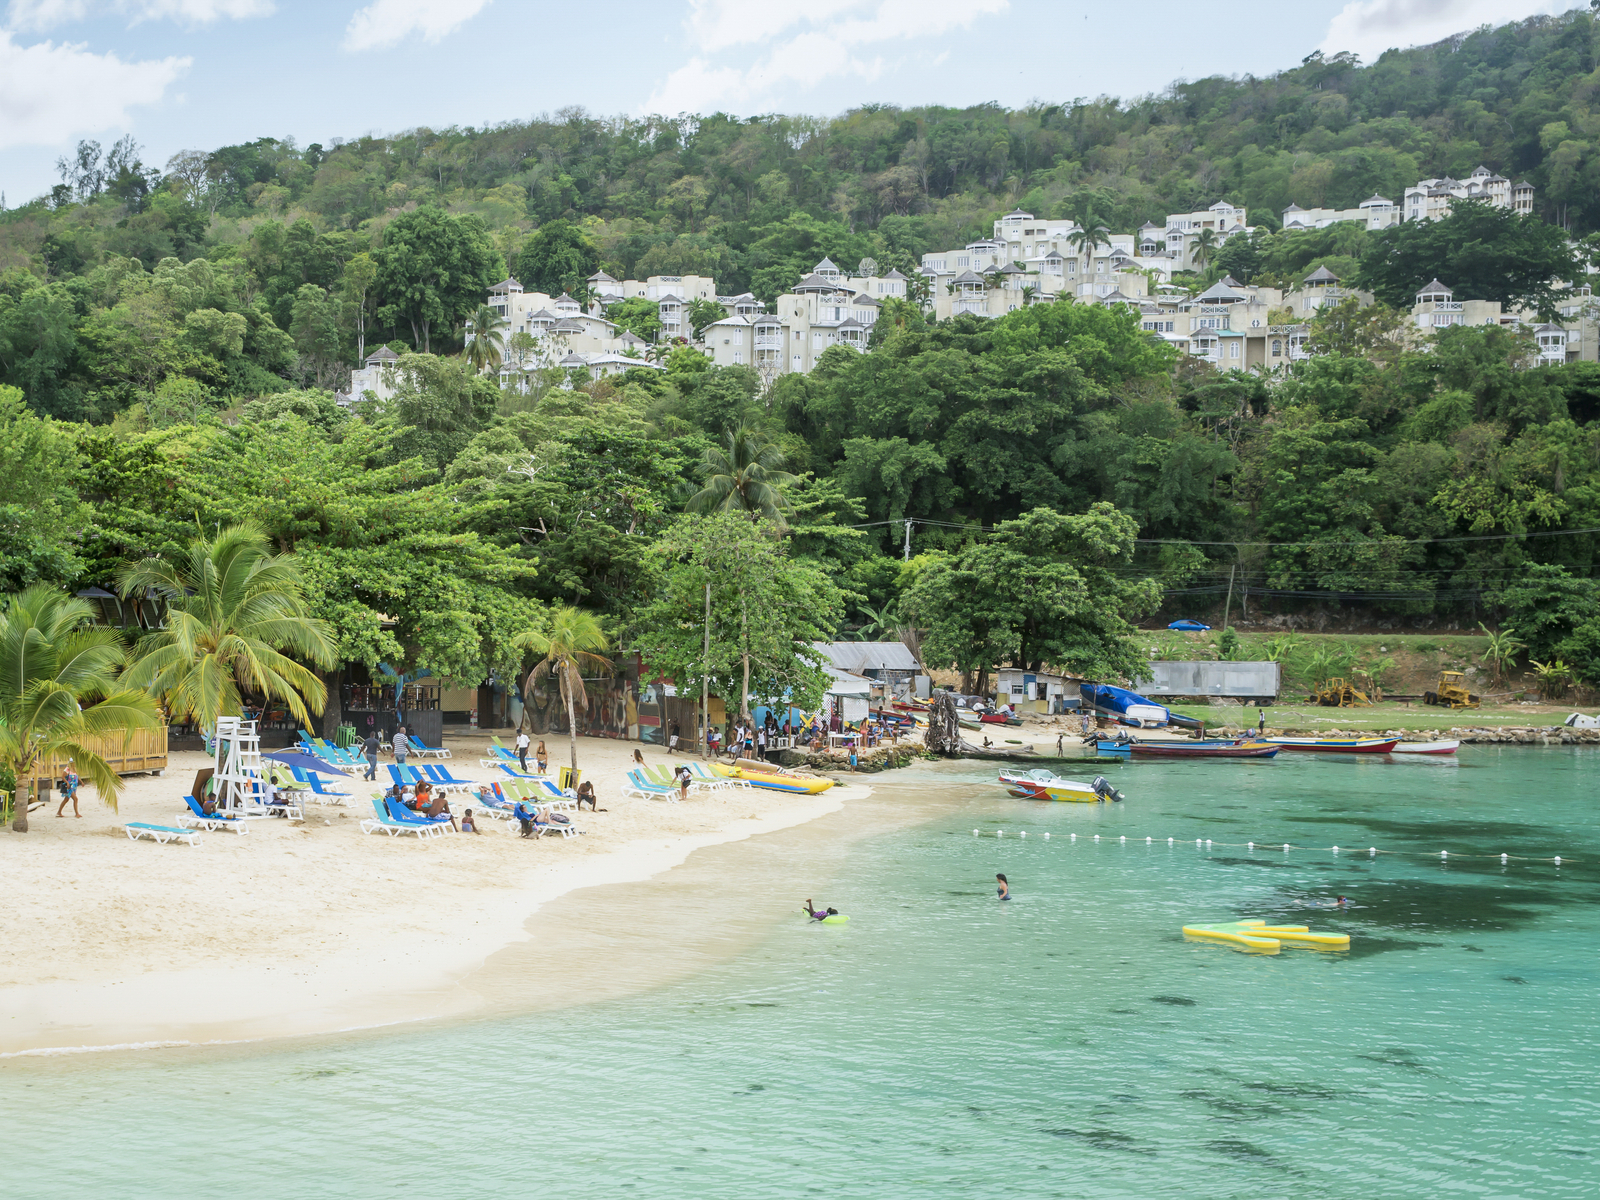 Ocho Rios Bay Beach, one of Jamaica's best beaches, seen with teal water on a clear day